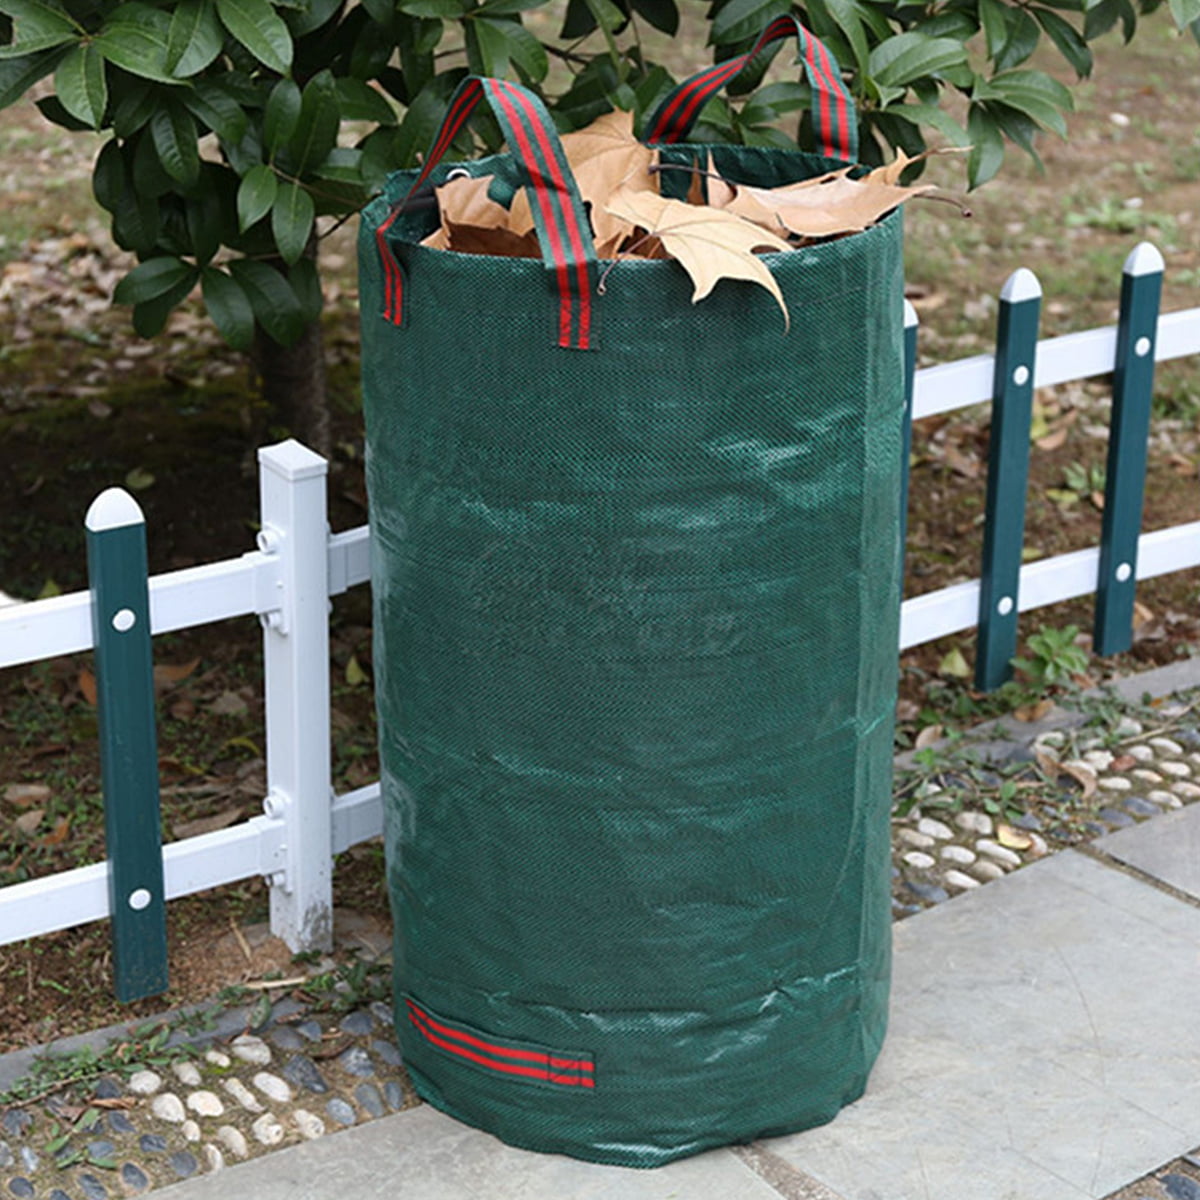 Garden Yard Heavy Duty Carry Bag Lawn Waste Weeds Leaves Grass Cutting Sack Bag 